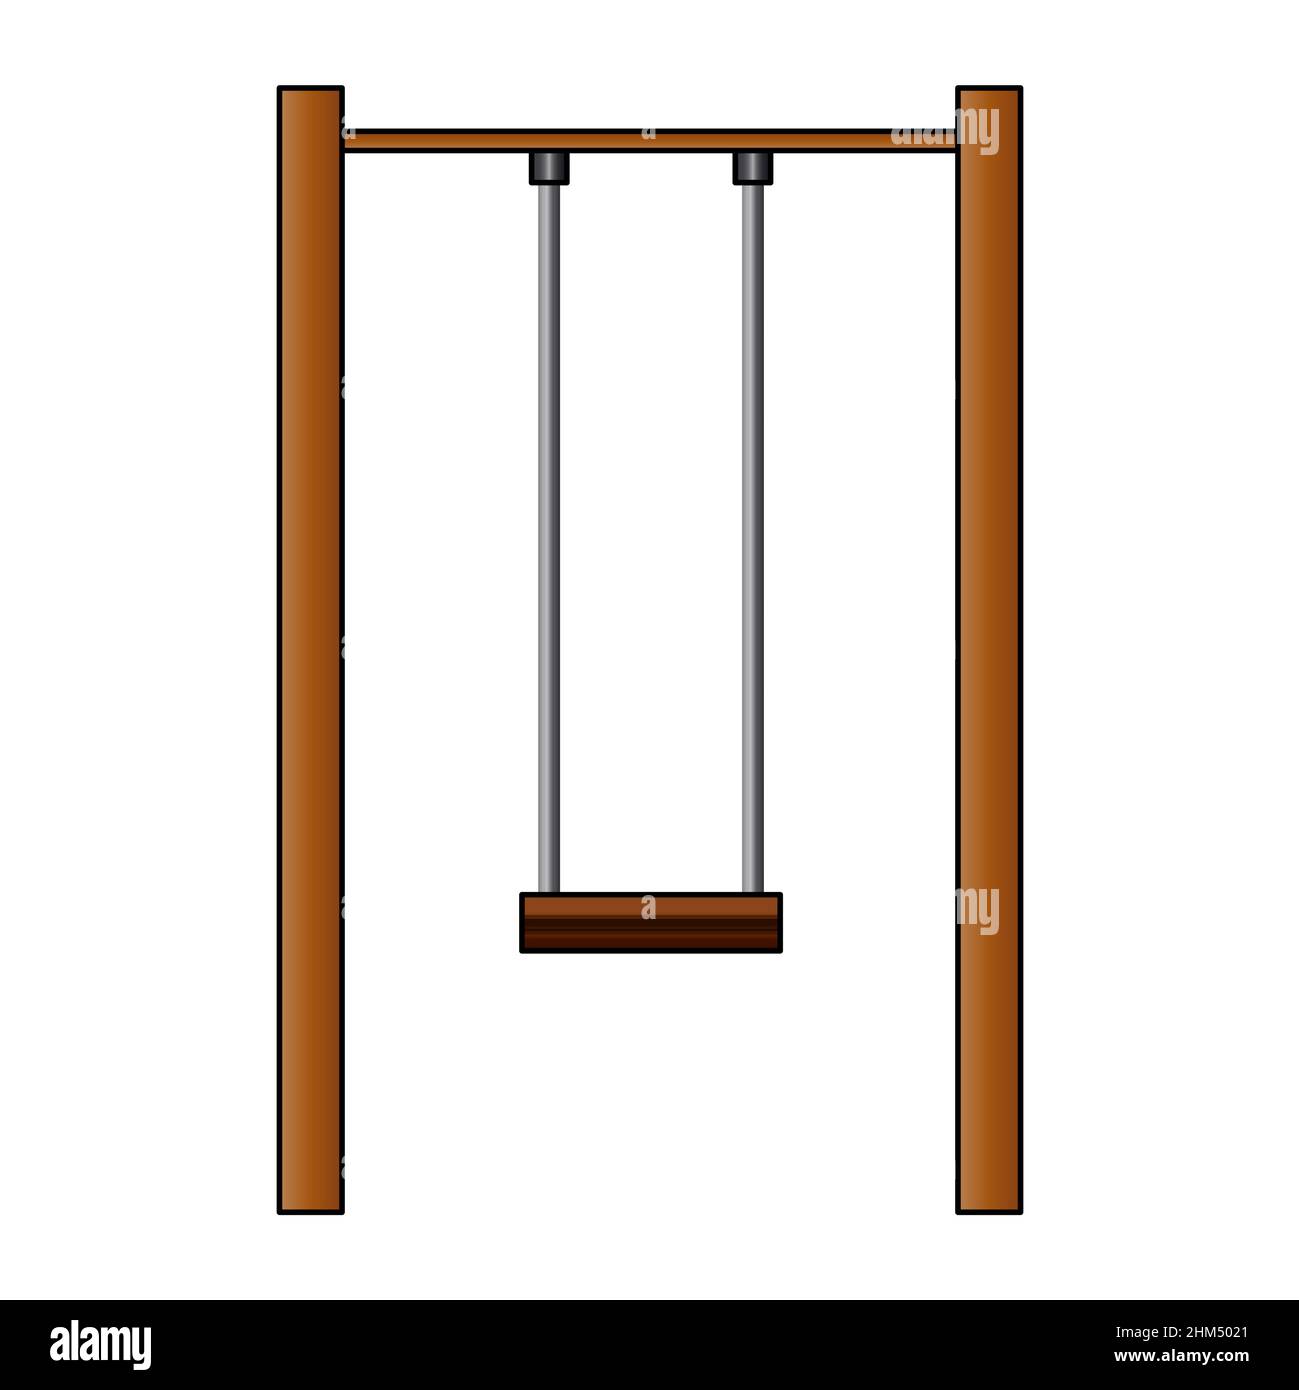 Kids swing vector illustration. empty swing isolated on a white background Stock Vector